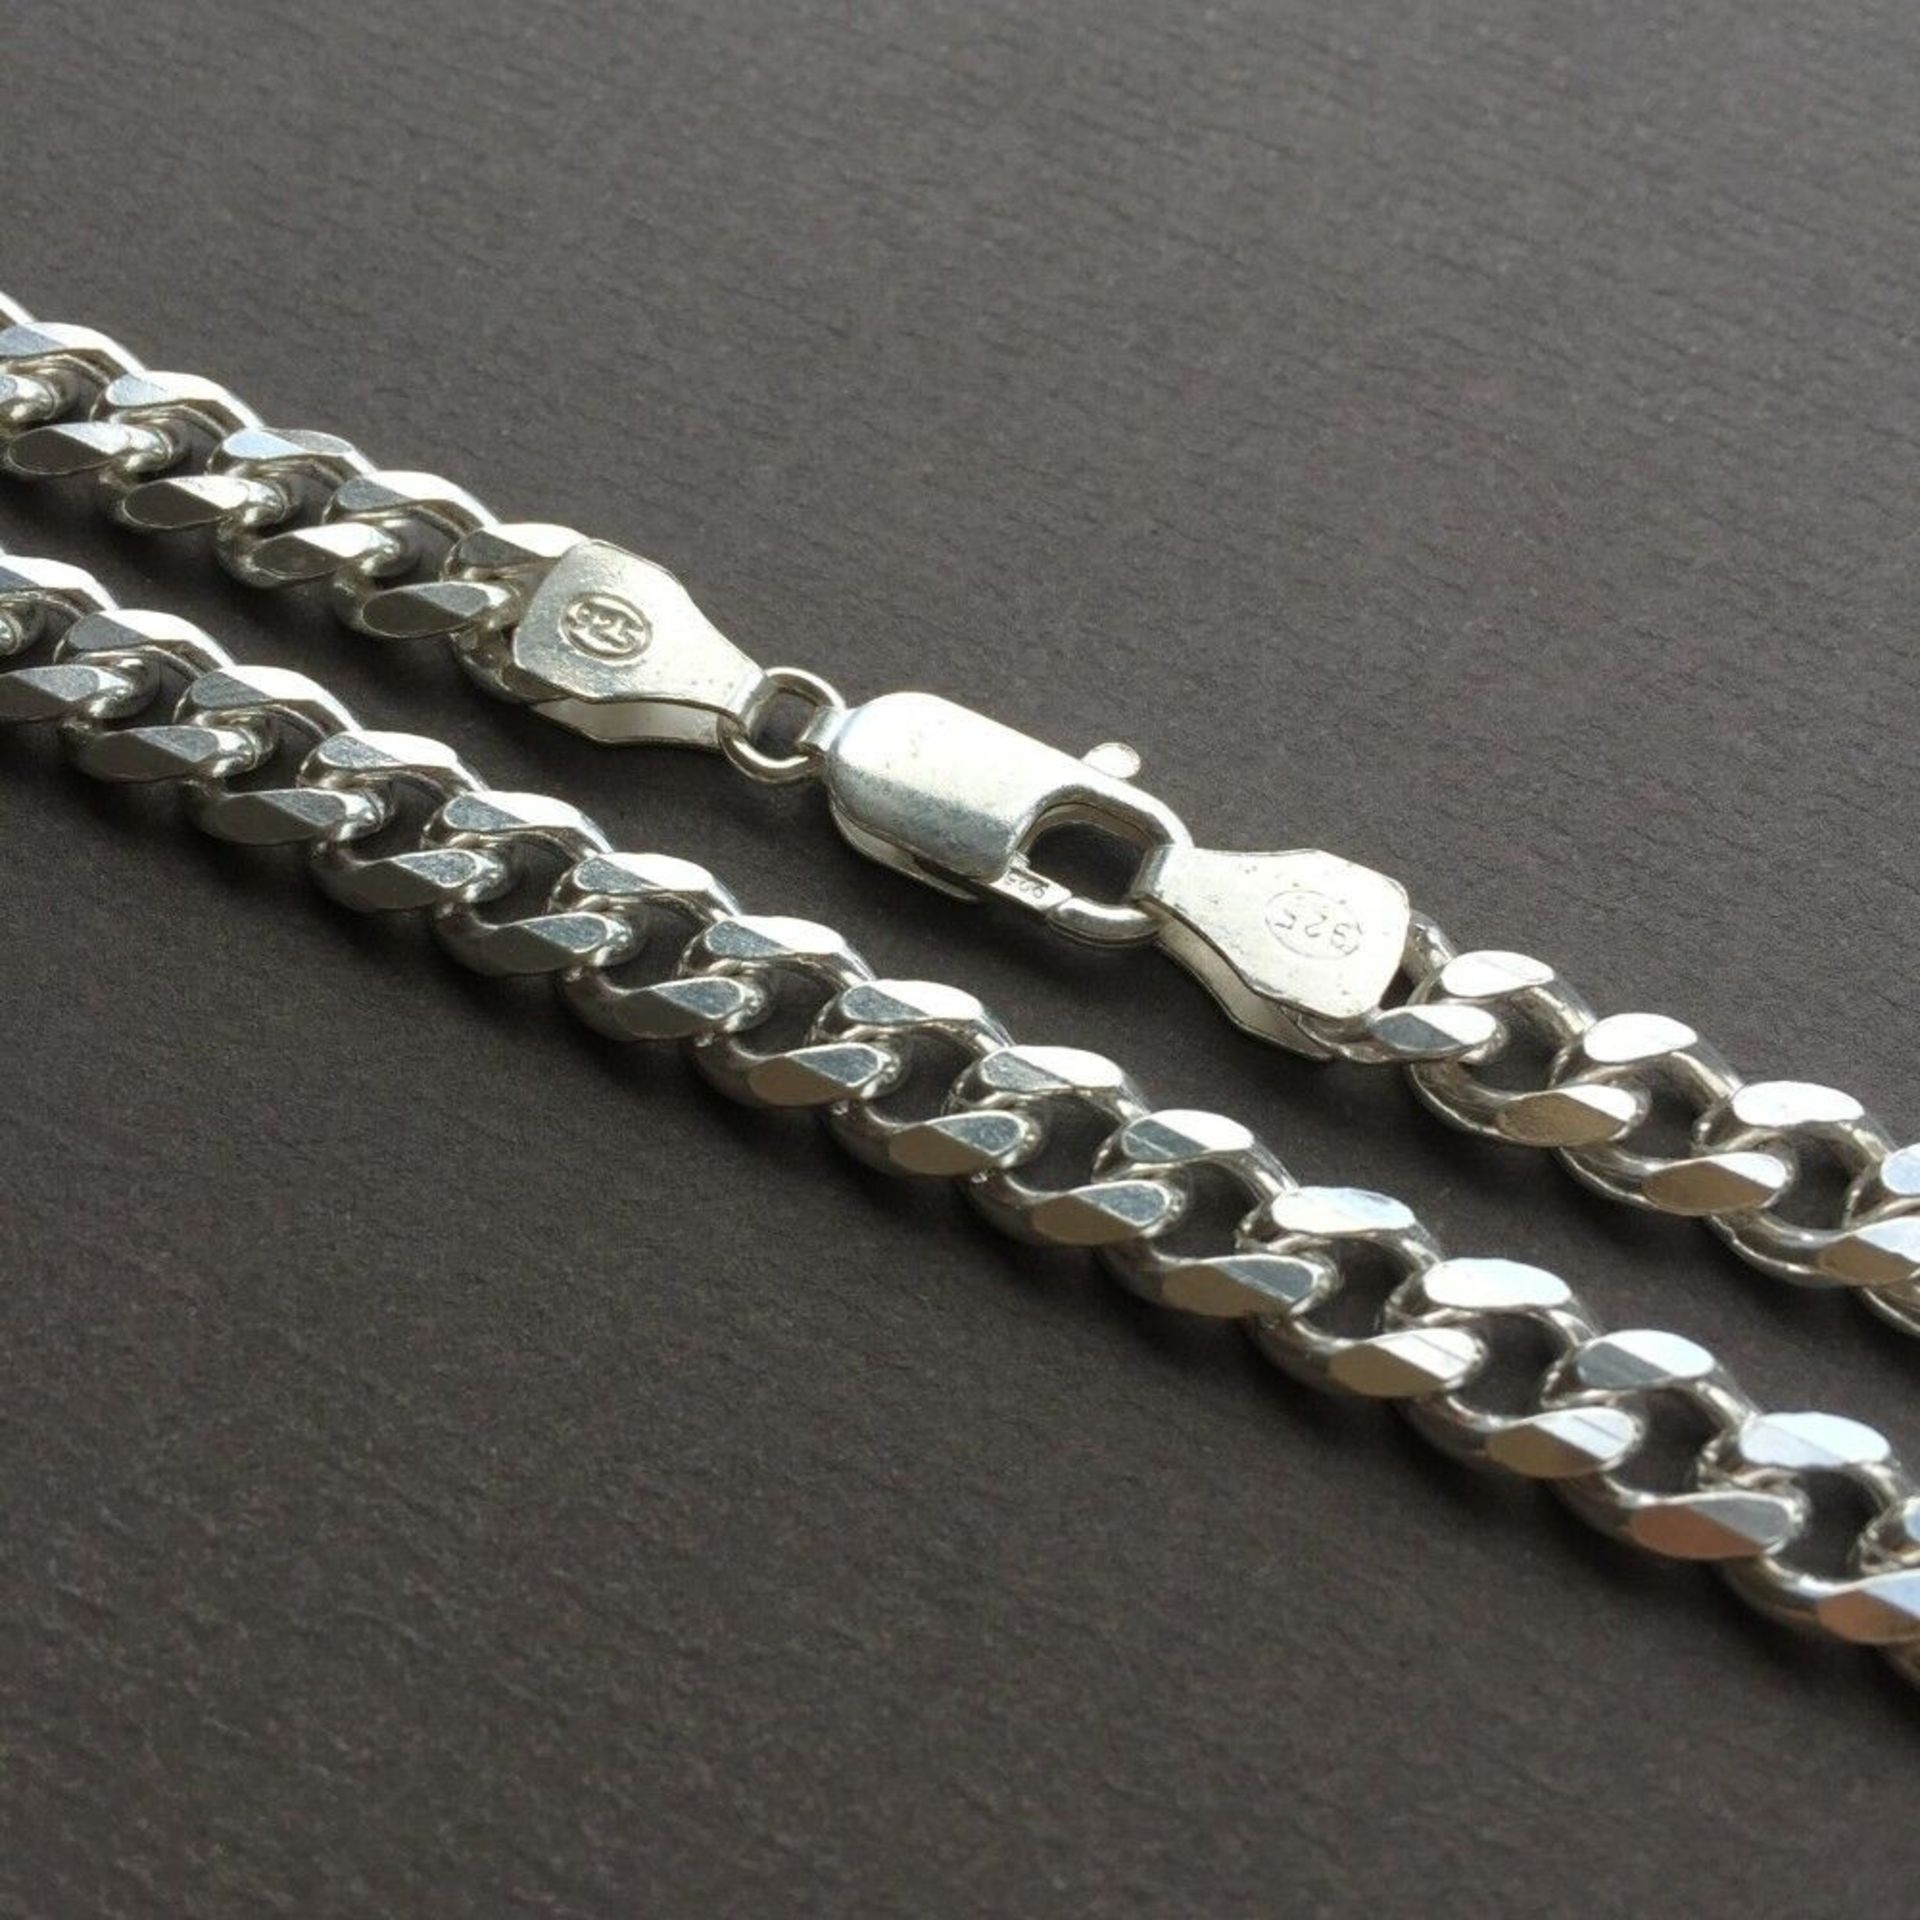 7mm Men's Curb Cuban Link Chain Necklace Pendant 925 Sterling Silver 48 GR 24 inch - 60cm - Image 4 of 7